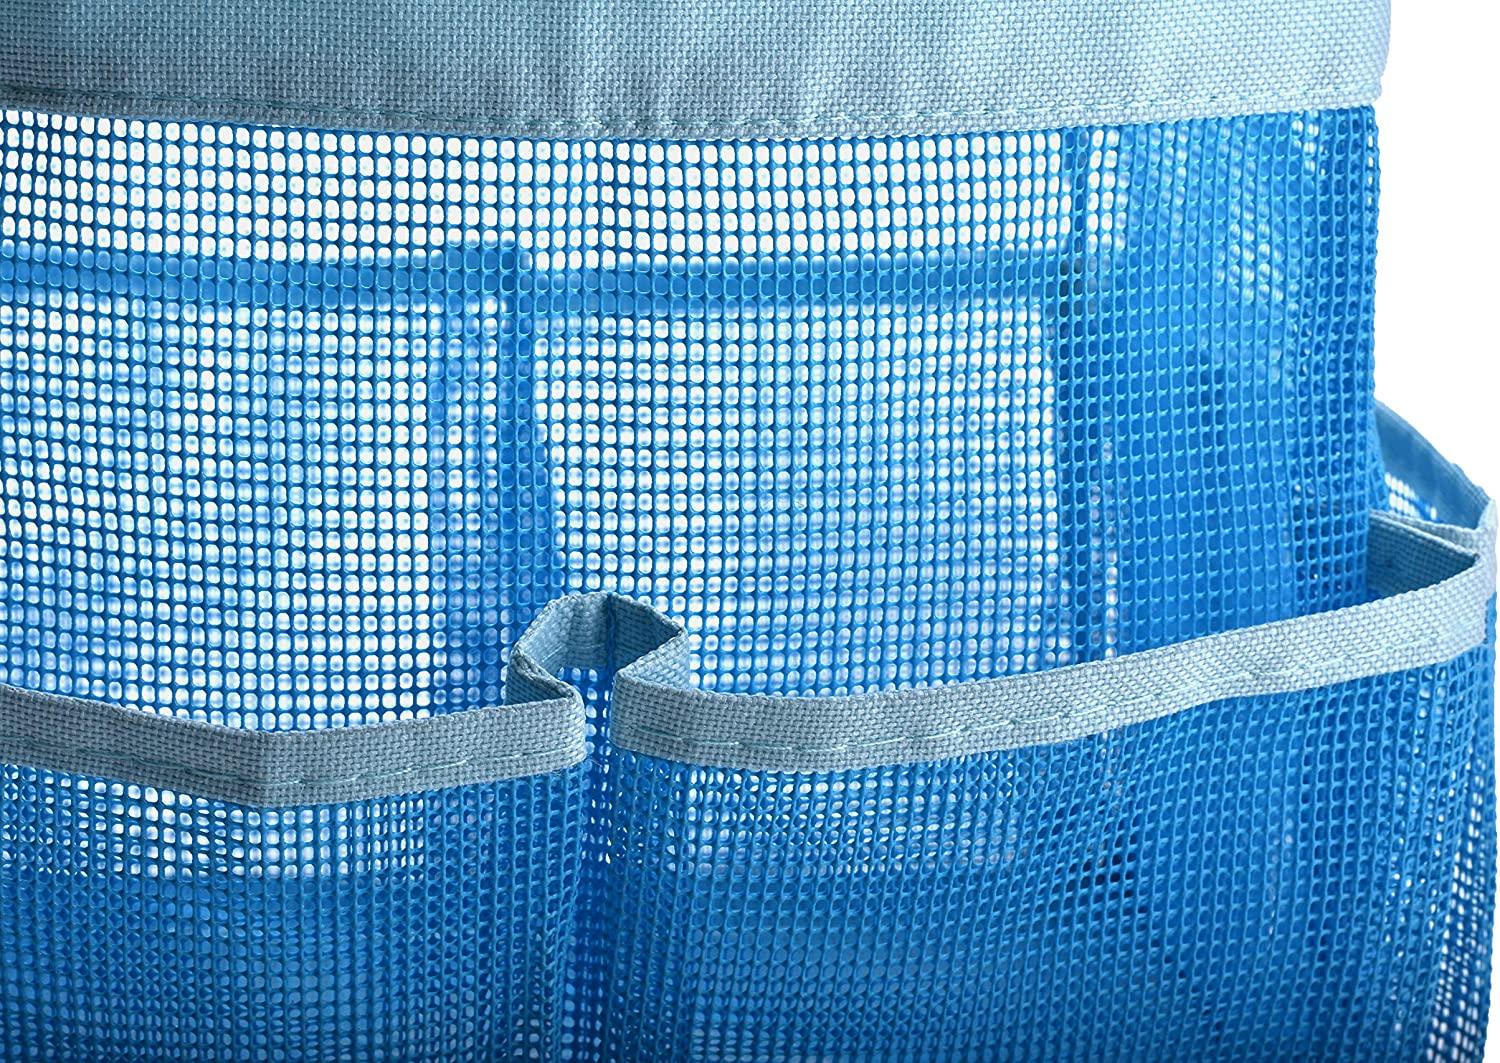 Mesh Shower Bag - Easily Carry, Organize Bathroom Toiletry Essentials While  Taking a Shower. (9-Pockets